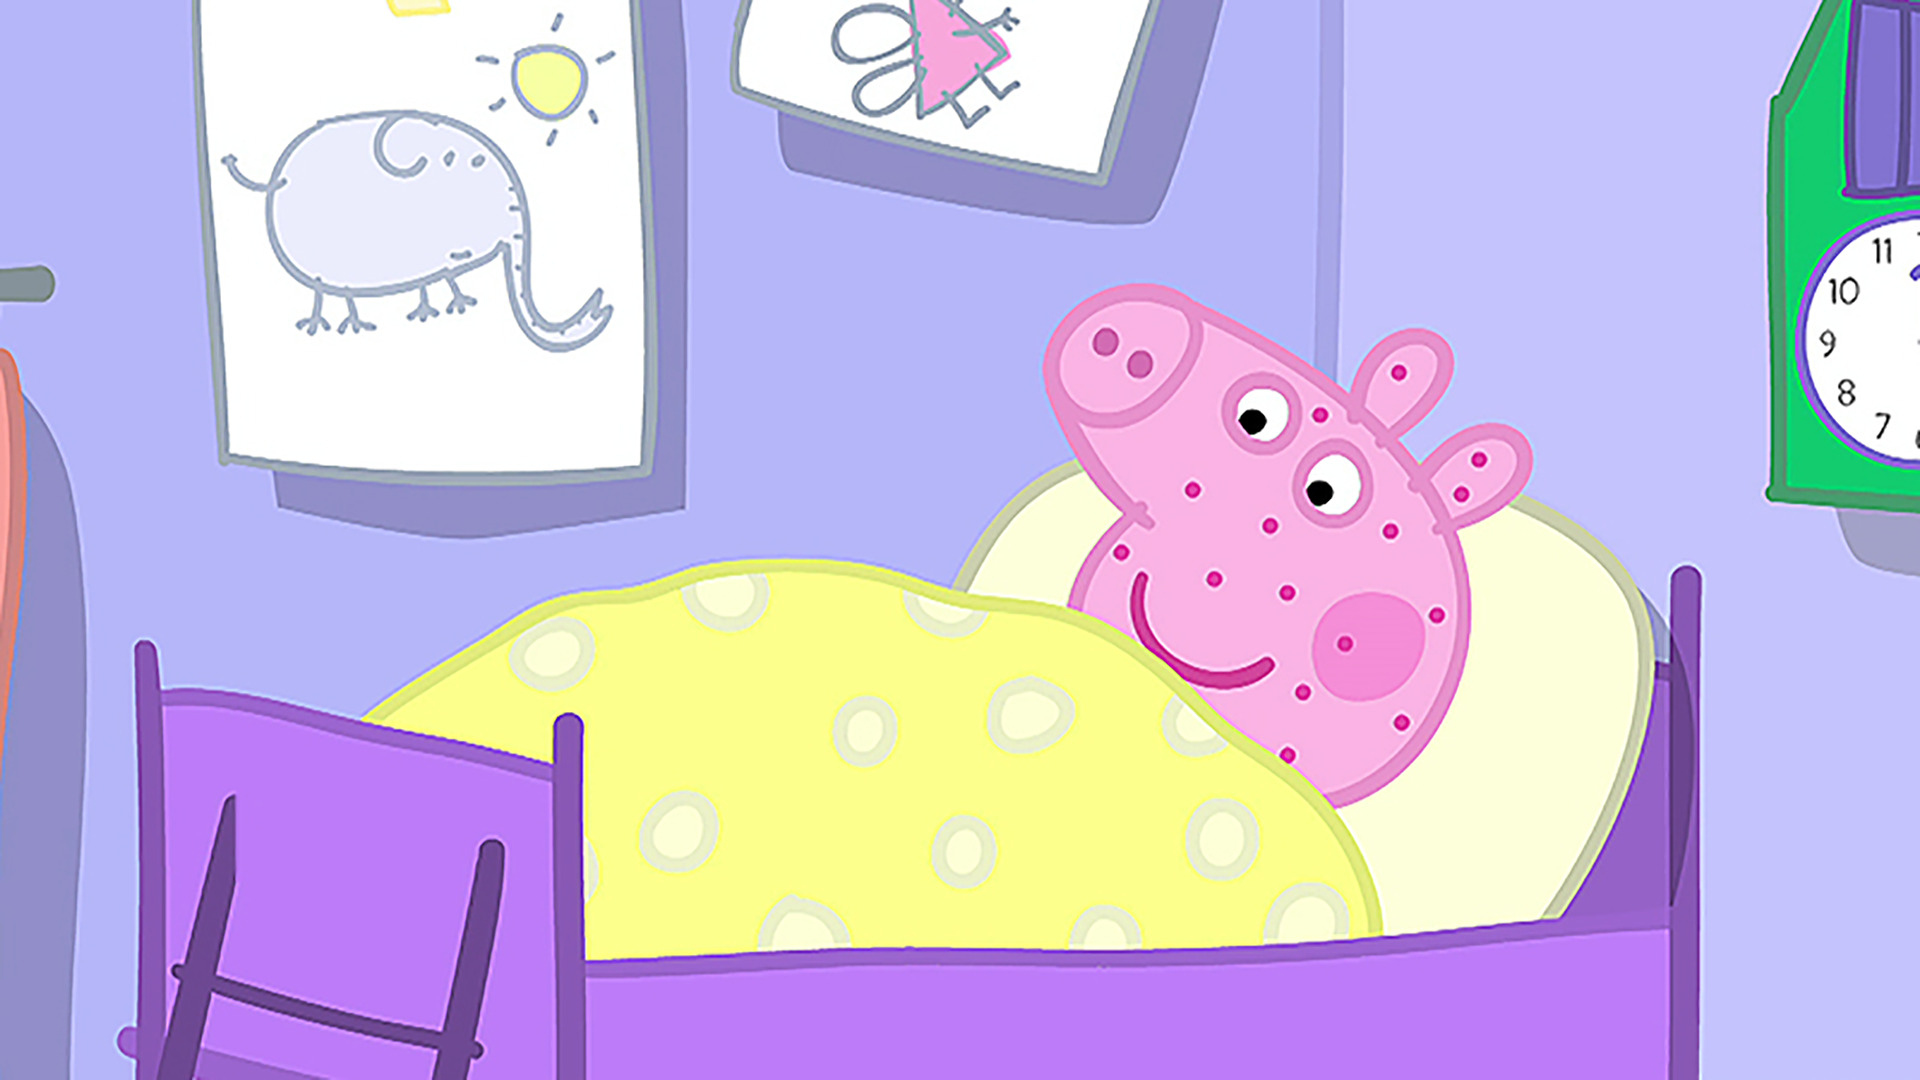 Peppa Pig - watch tv show streaming online